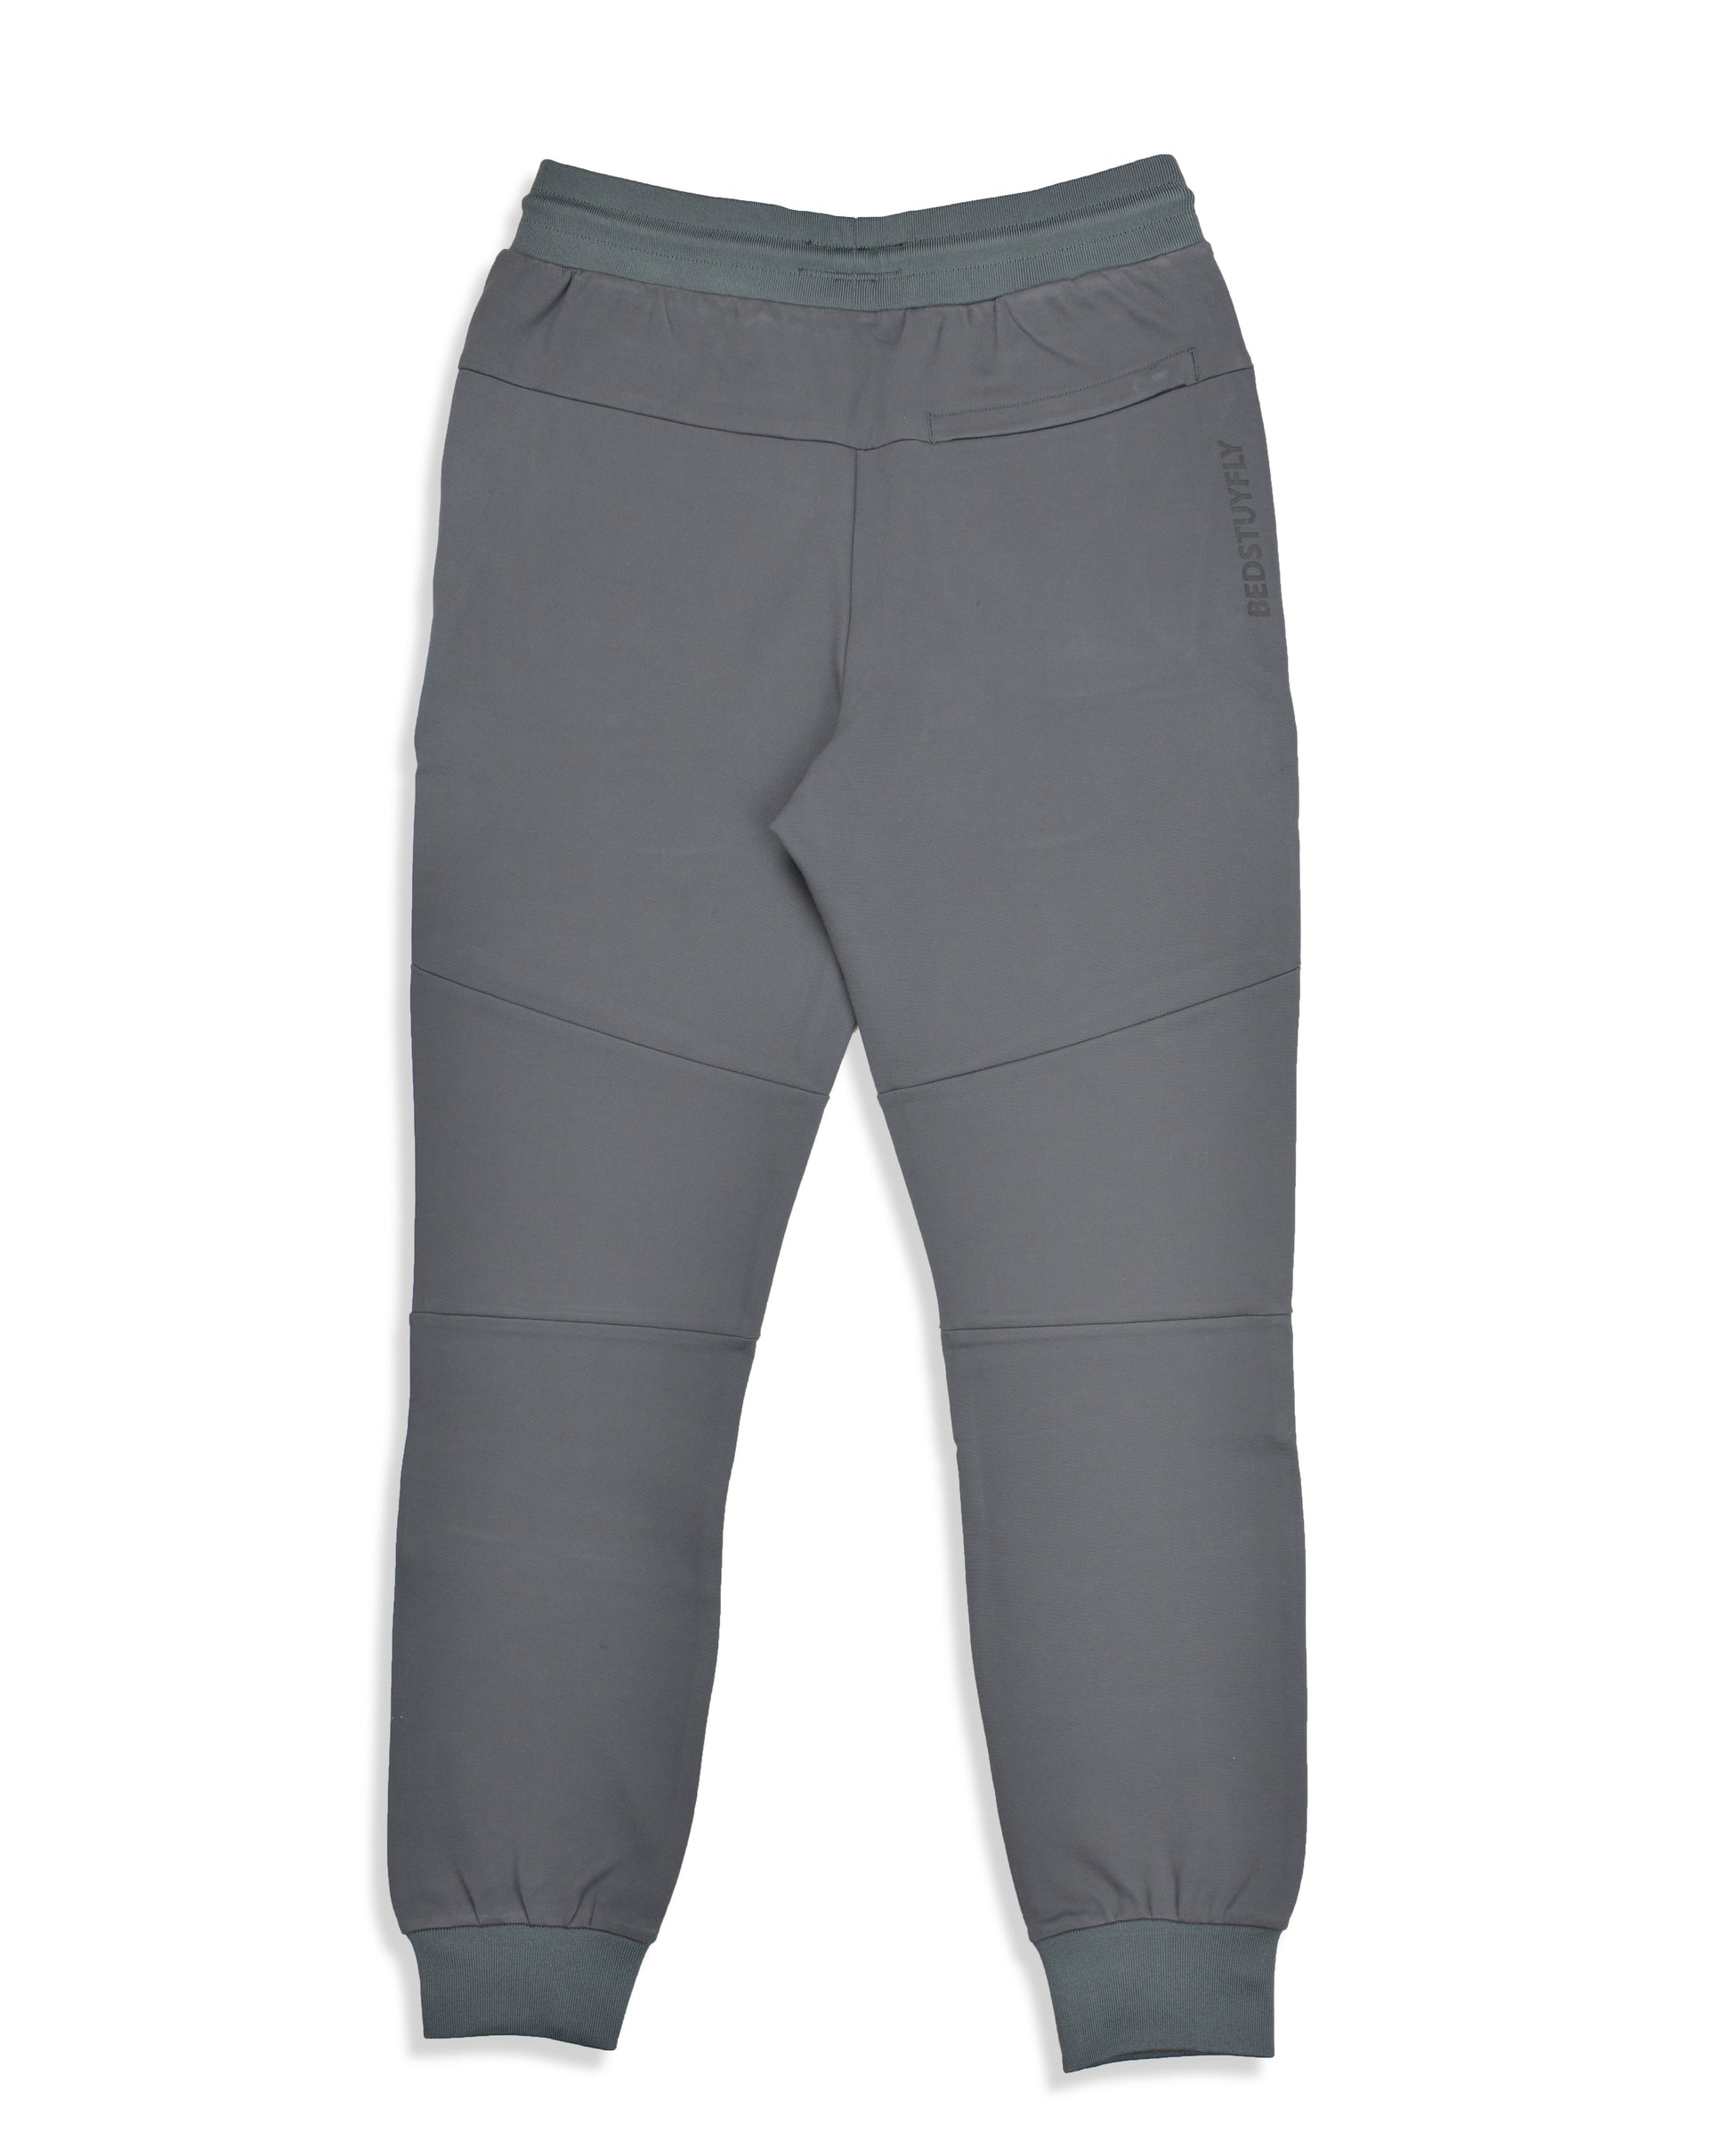 Private Collection Pants (Gray) - Bedstuyfly